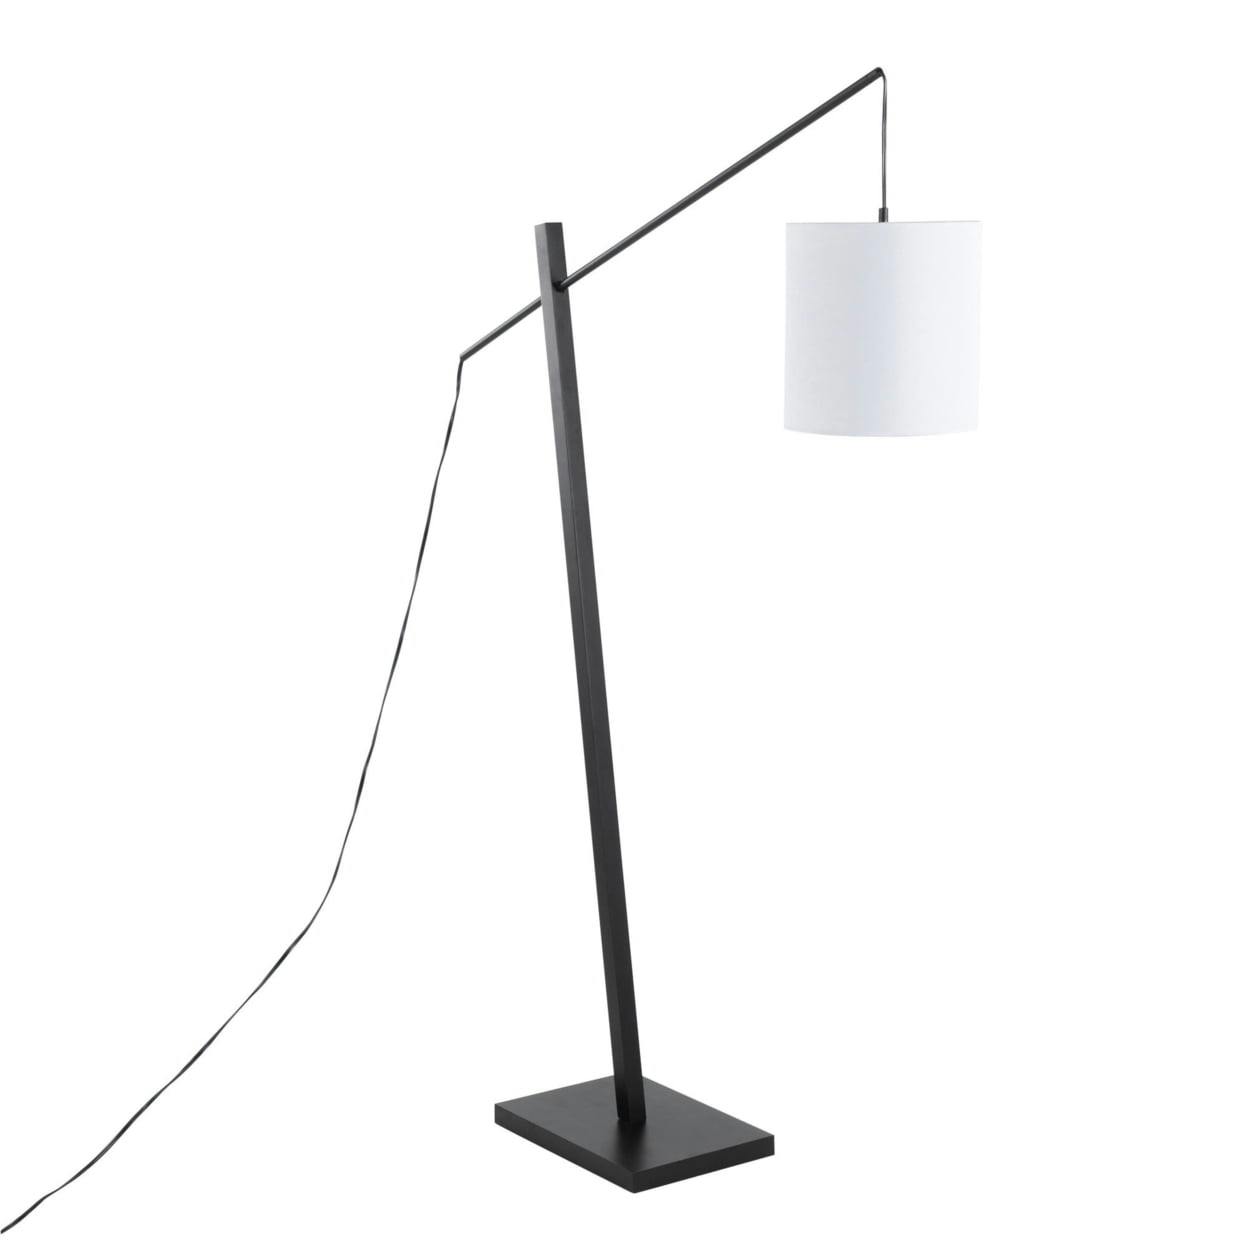 Arturo 42" Contemporary Black Wood & Steel Floor Lamp with White Shade